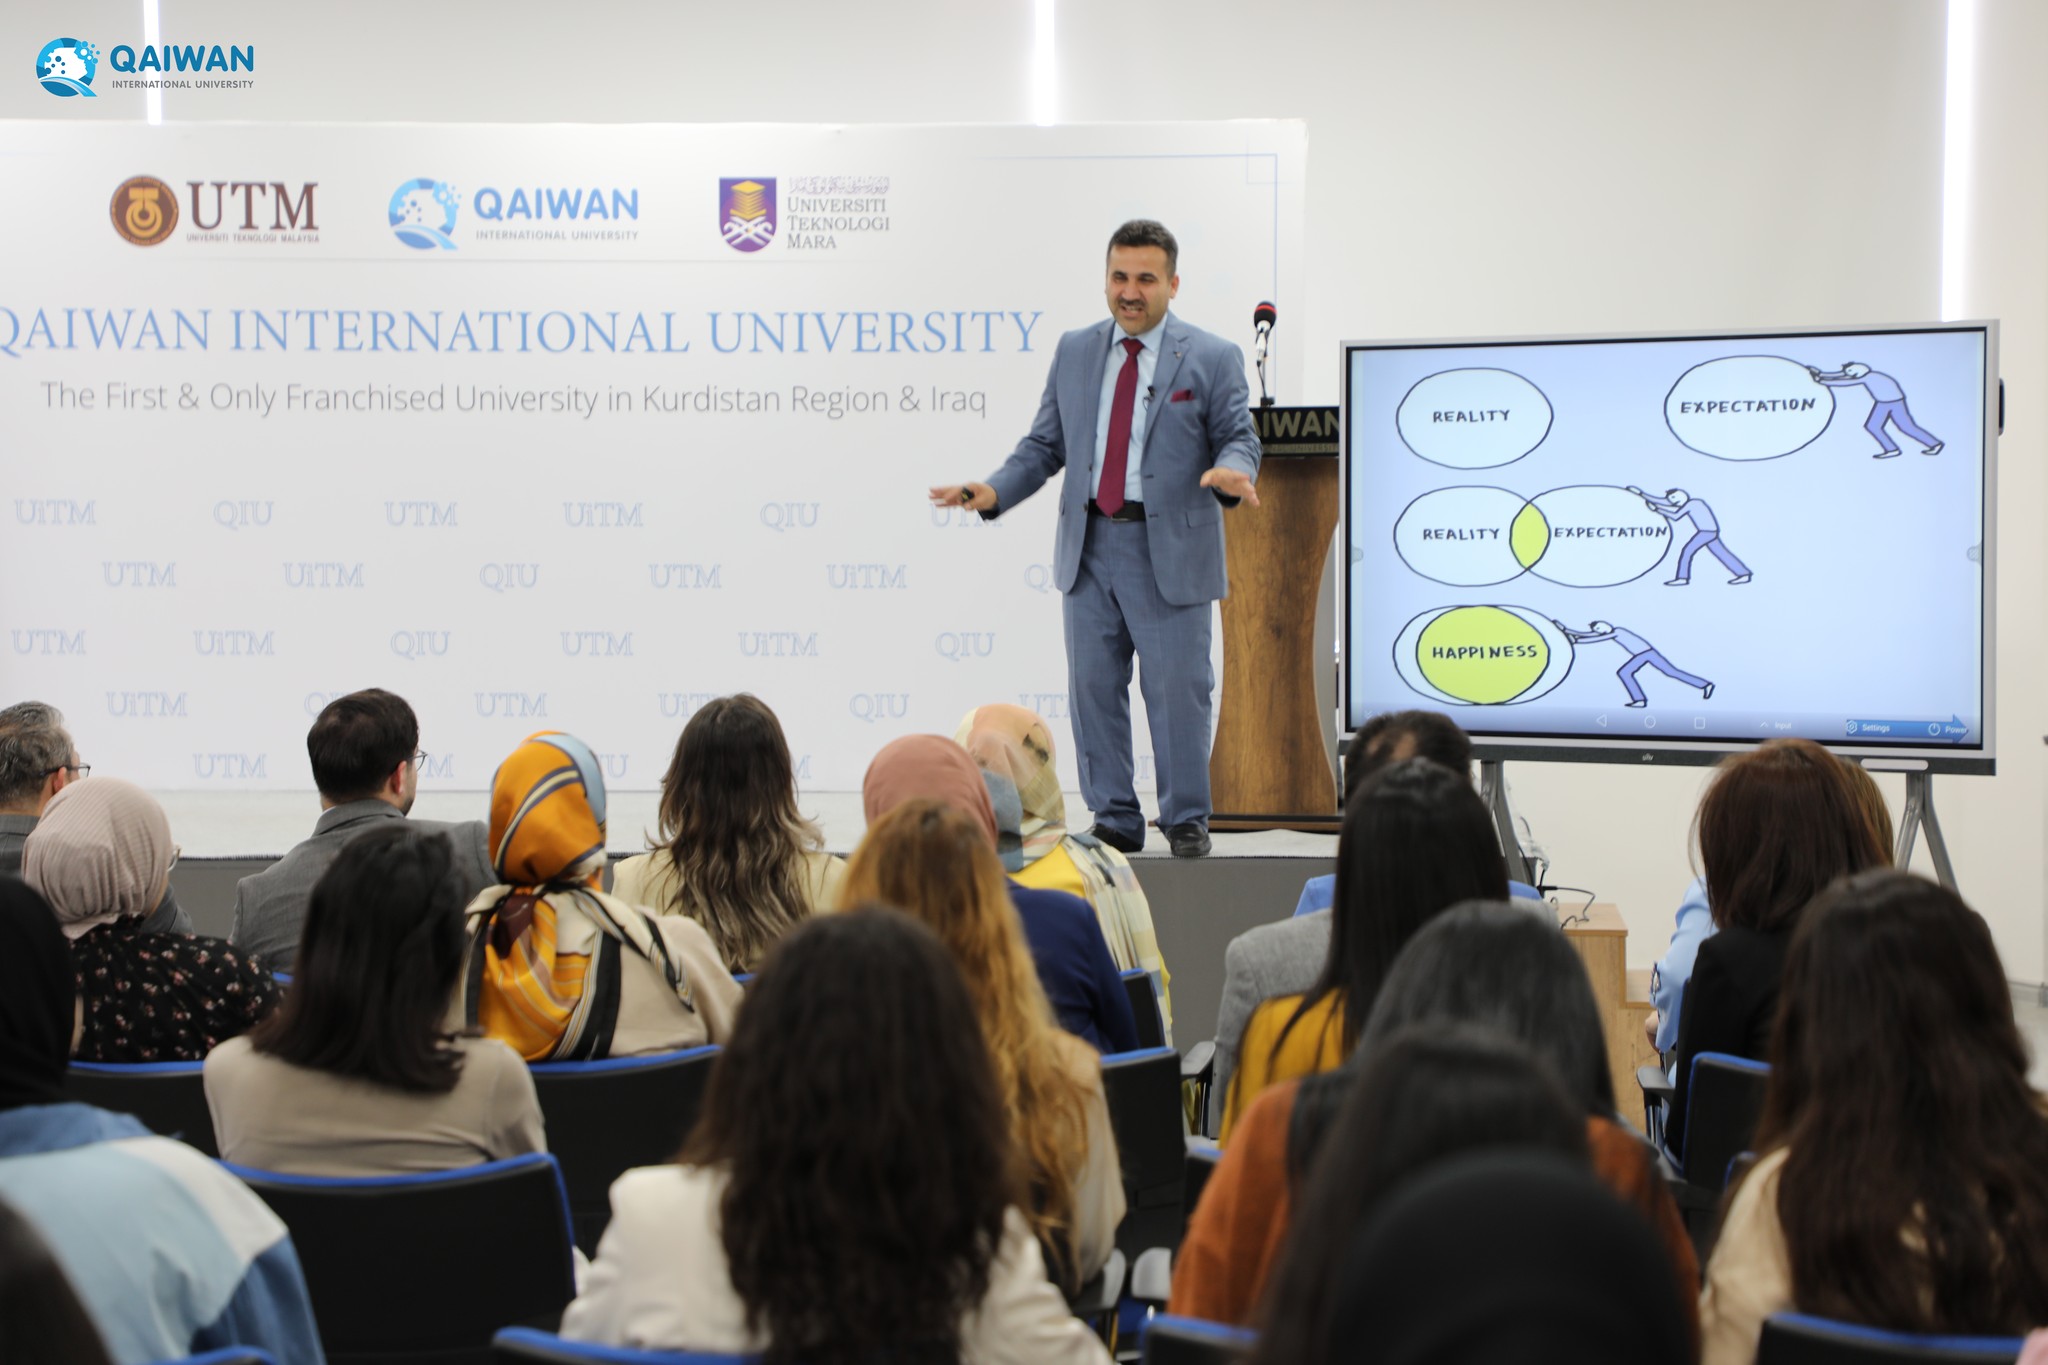 University lecturer and human development trainer, urged students to embrace their university experience and strive for happiness by making the most of available opportunities